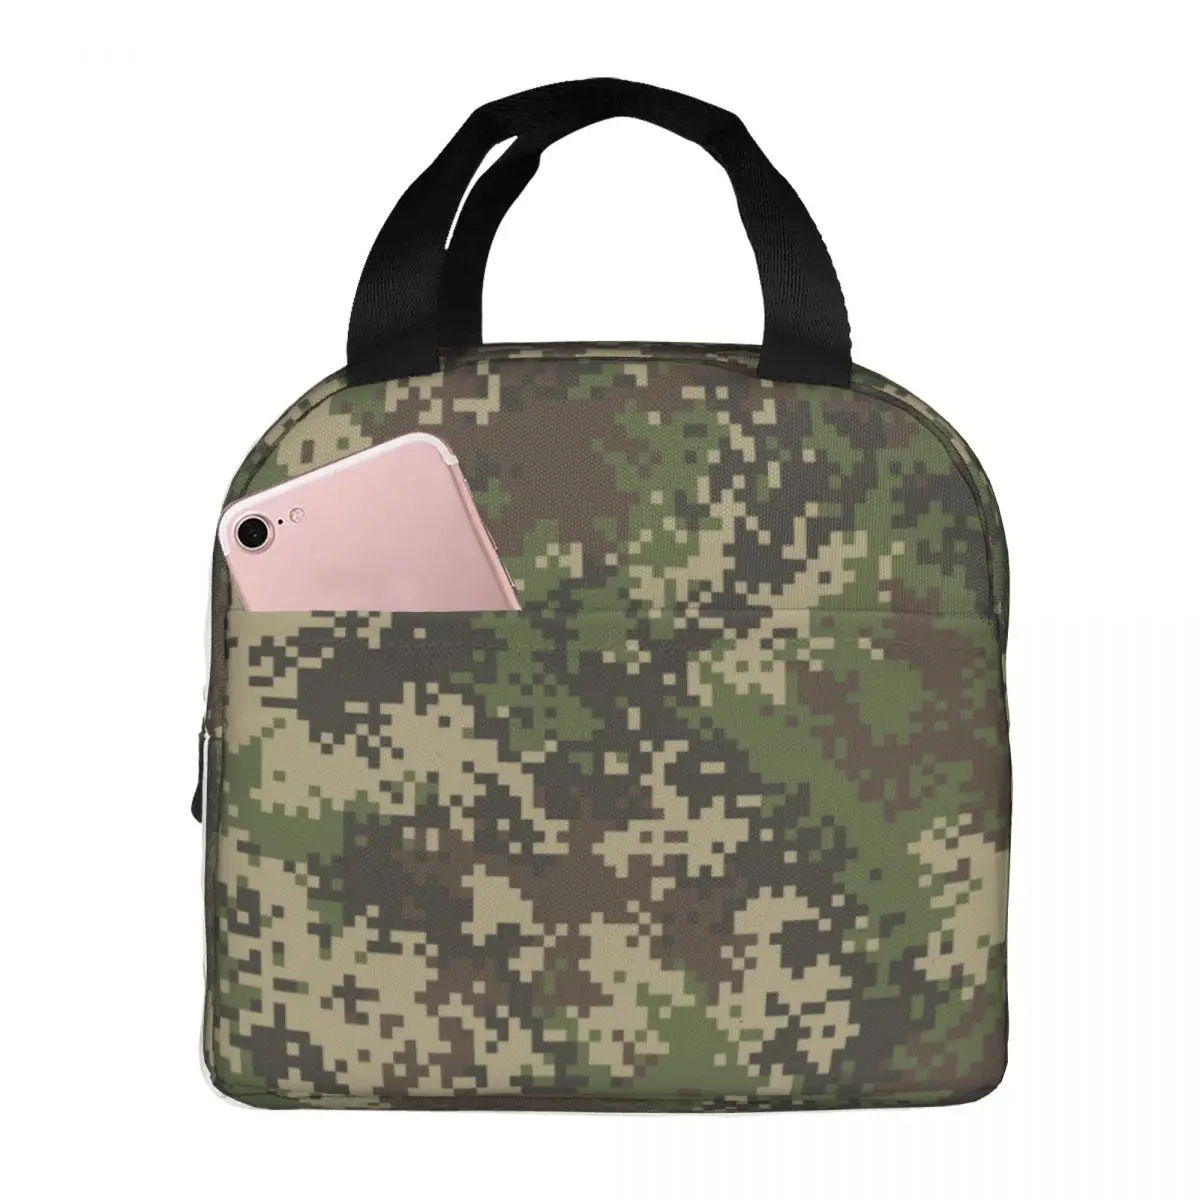 Camo Camouflage Army Lunch Bags Portable Insulated Oxford Cooler Military Pattern Thermal Food Picnic Lunch Box for Women Girl